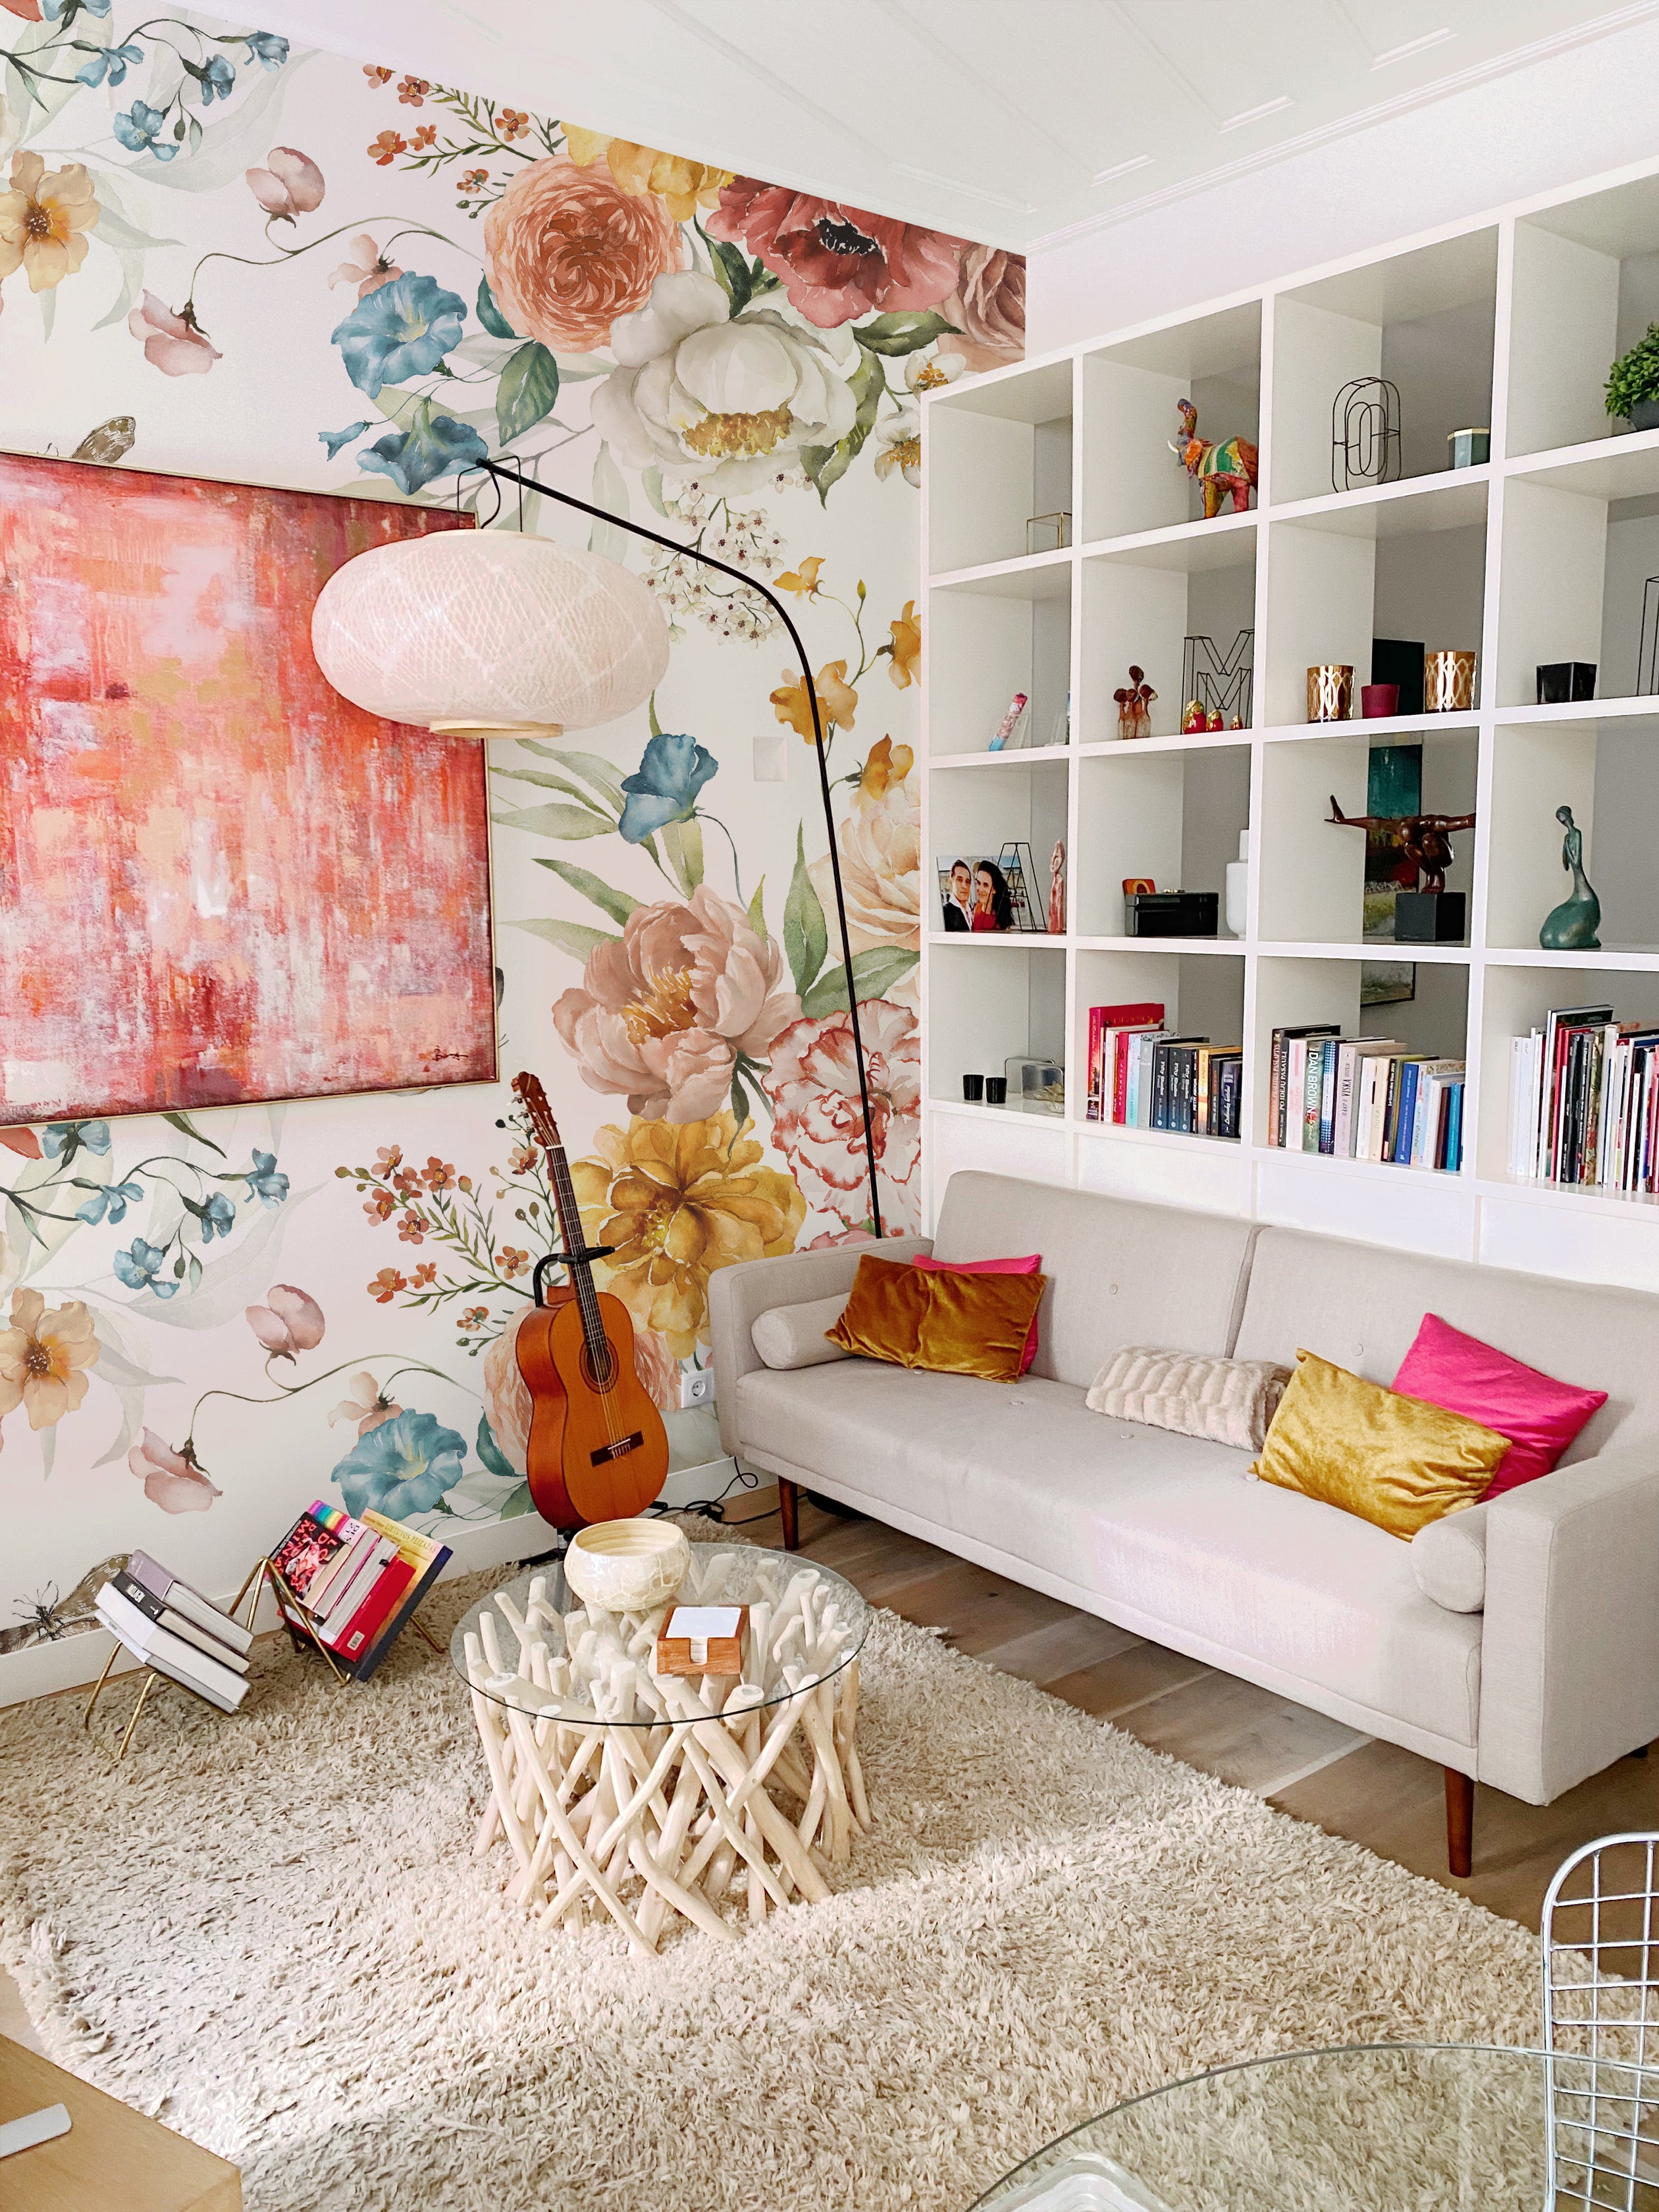 A cozy living room with a floral wallpaper that features a vibrant watercolor design of roses, peonies, and other flowers in red, pink, yellow, blue, and white, along with green foliage. The room includes a white sofa with colorful cushions, a guitar, a glass coffee table with a natural wood base, and a bookshelf filled with books and decor items